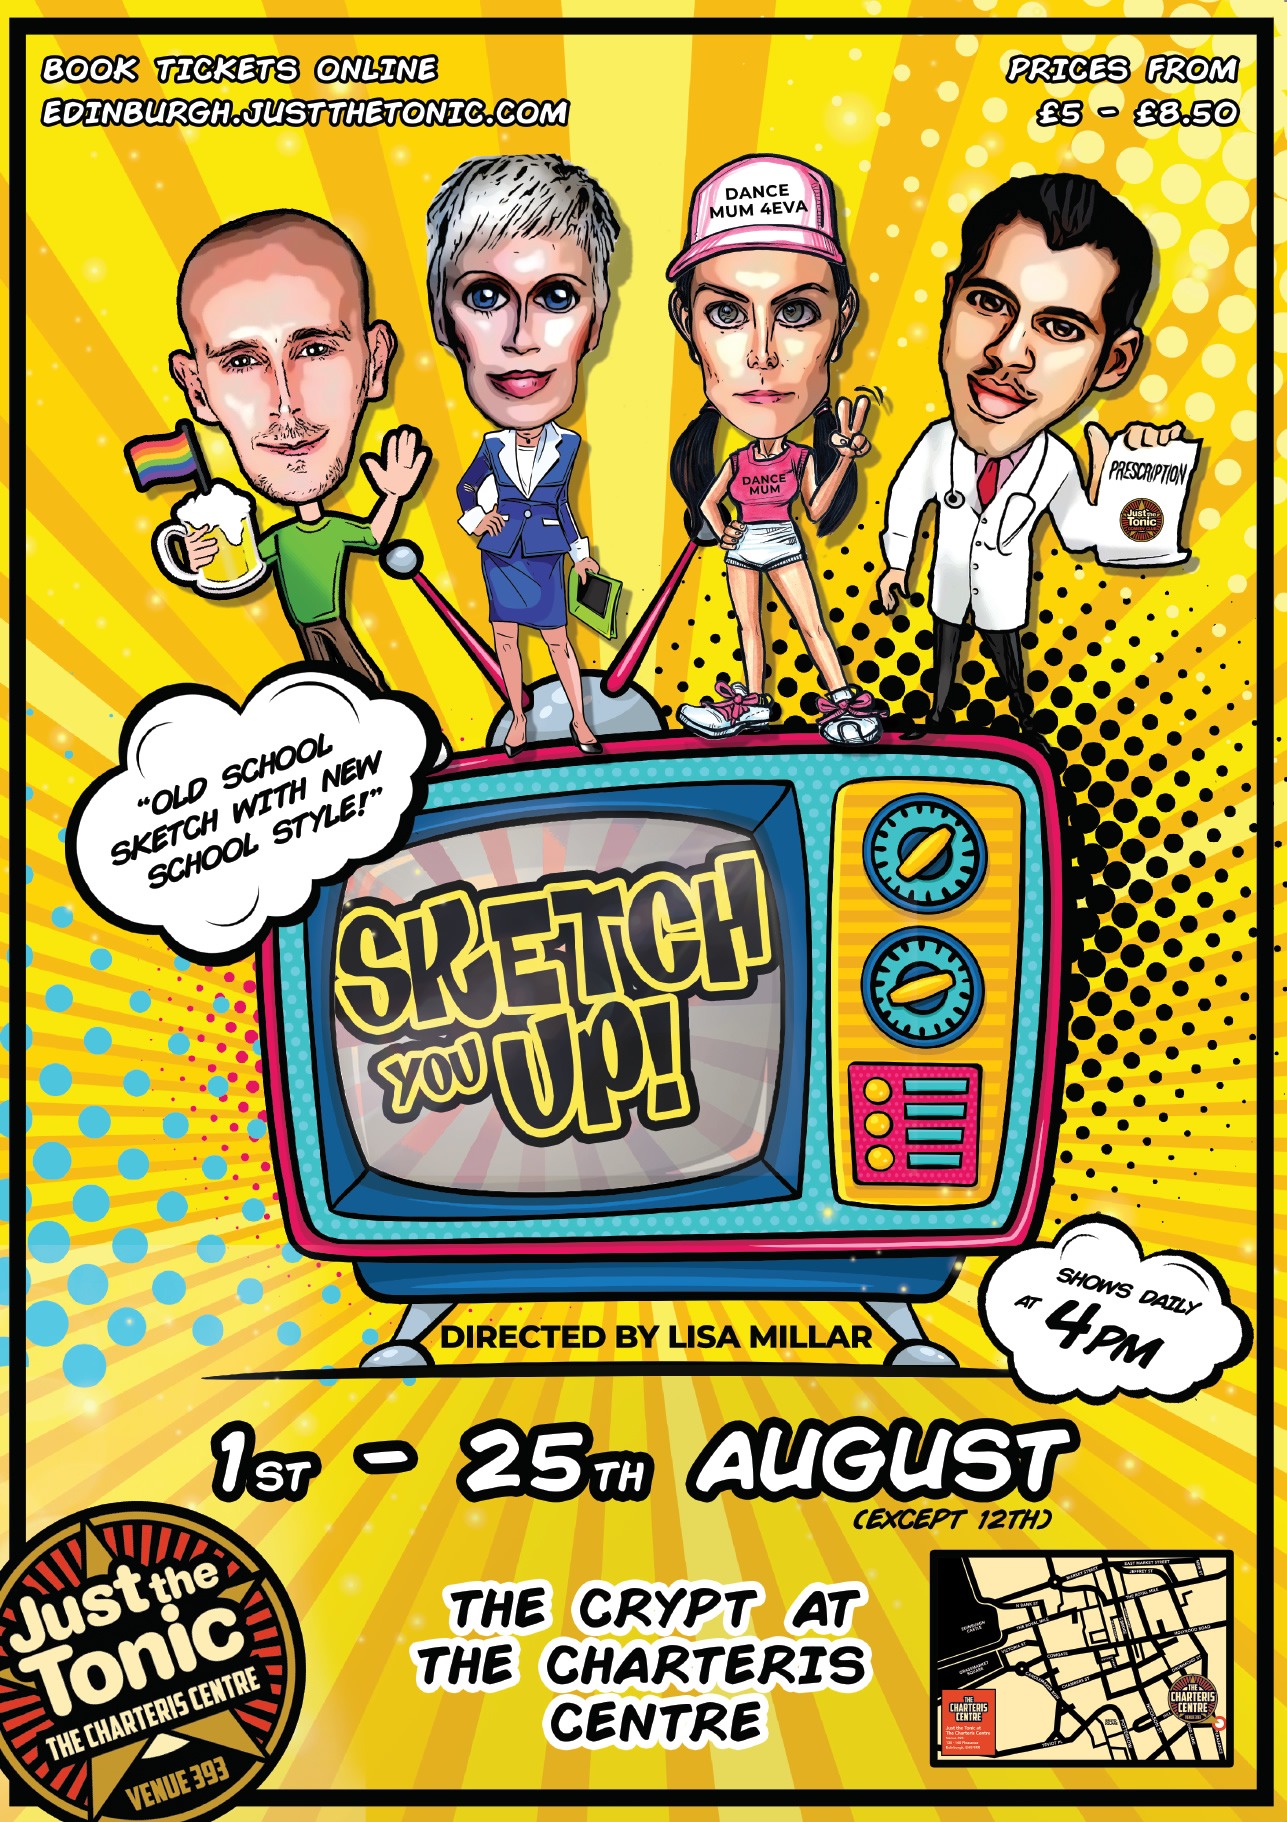 The poster for Sketch You Up!